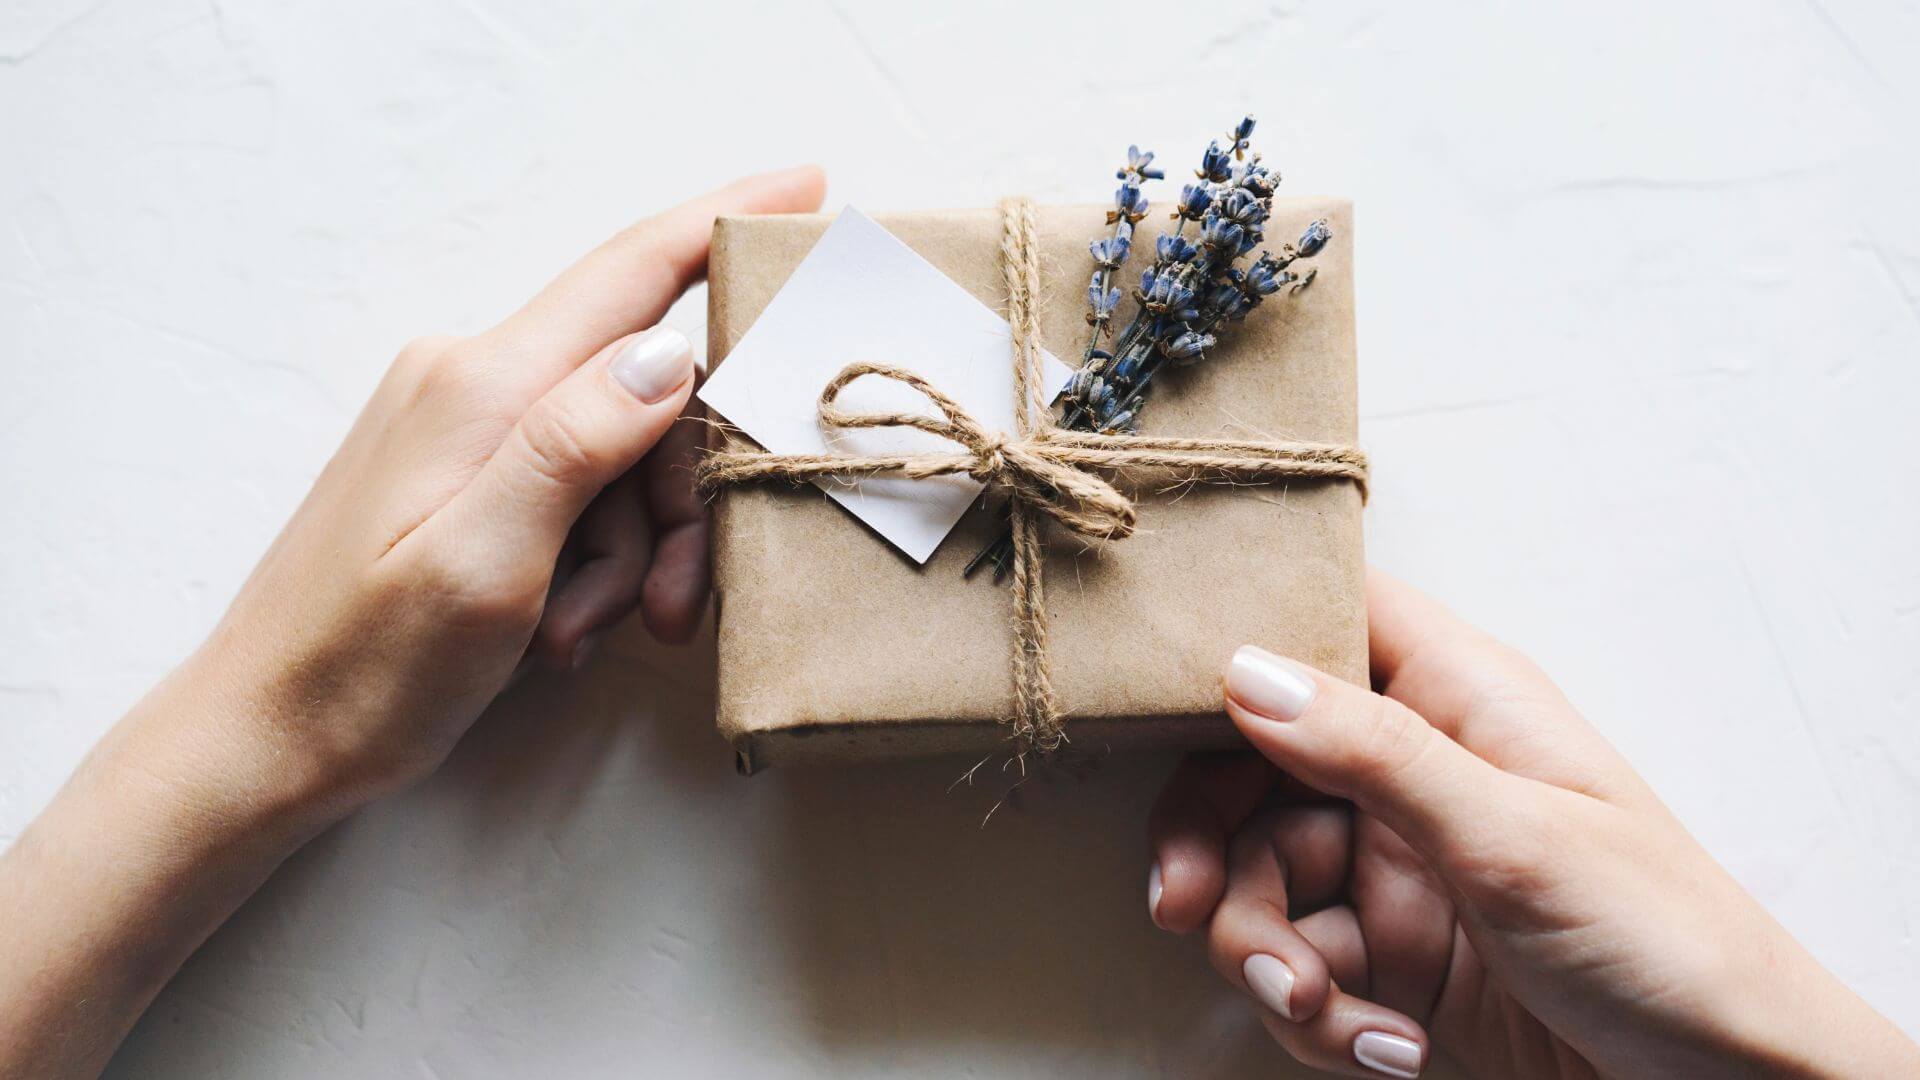 Collombatti Naturals Handmade and ecofriendly christmas gifts picture of a womans hands holding a gift wrapped in brown paper and decorated with lavender